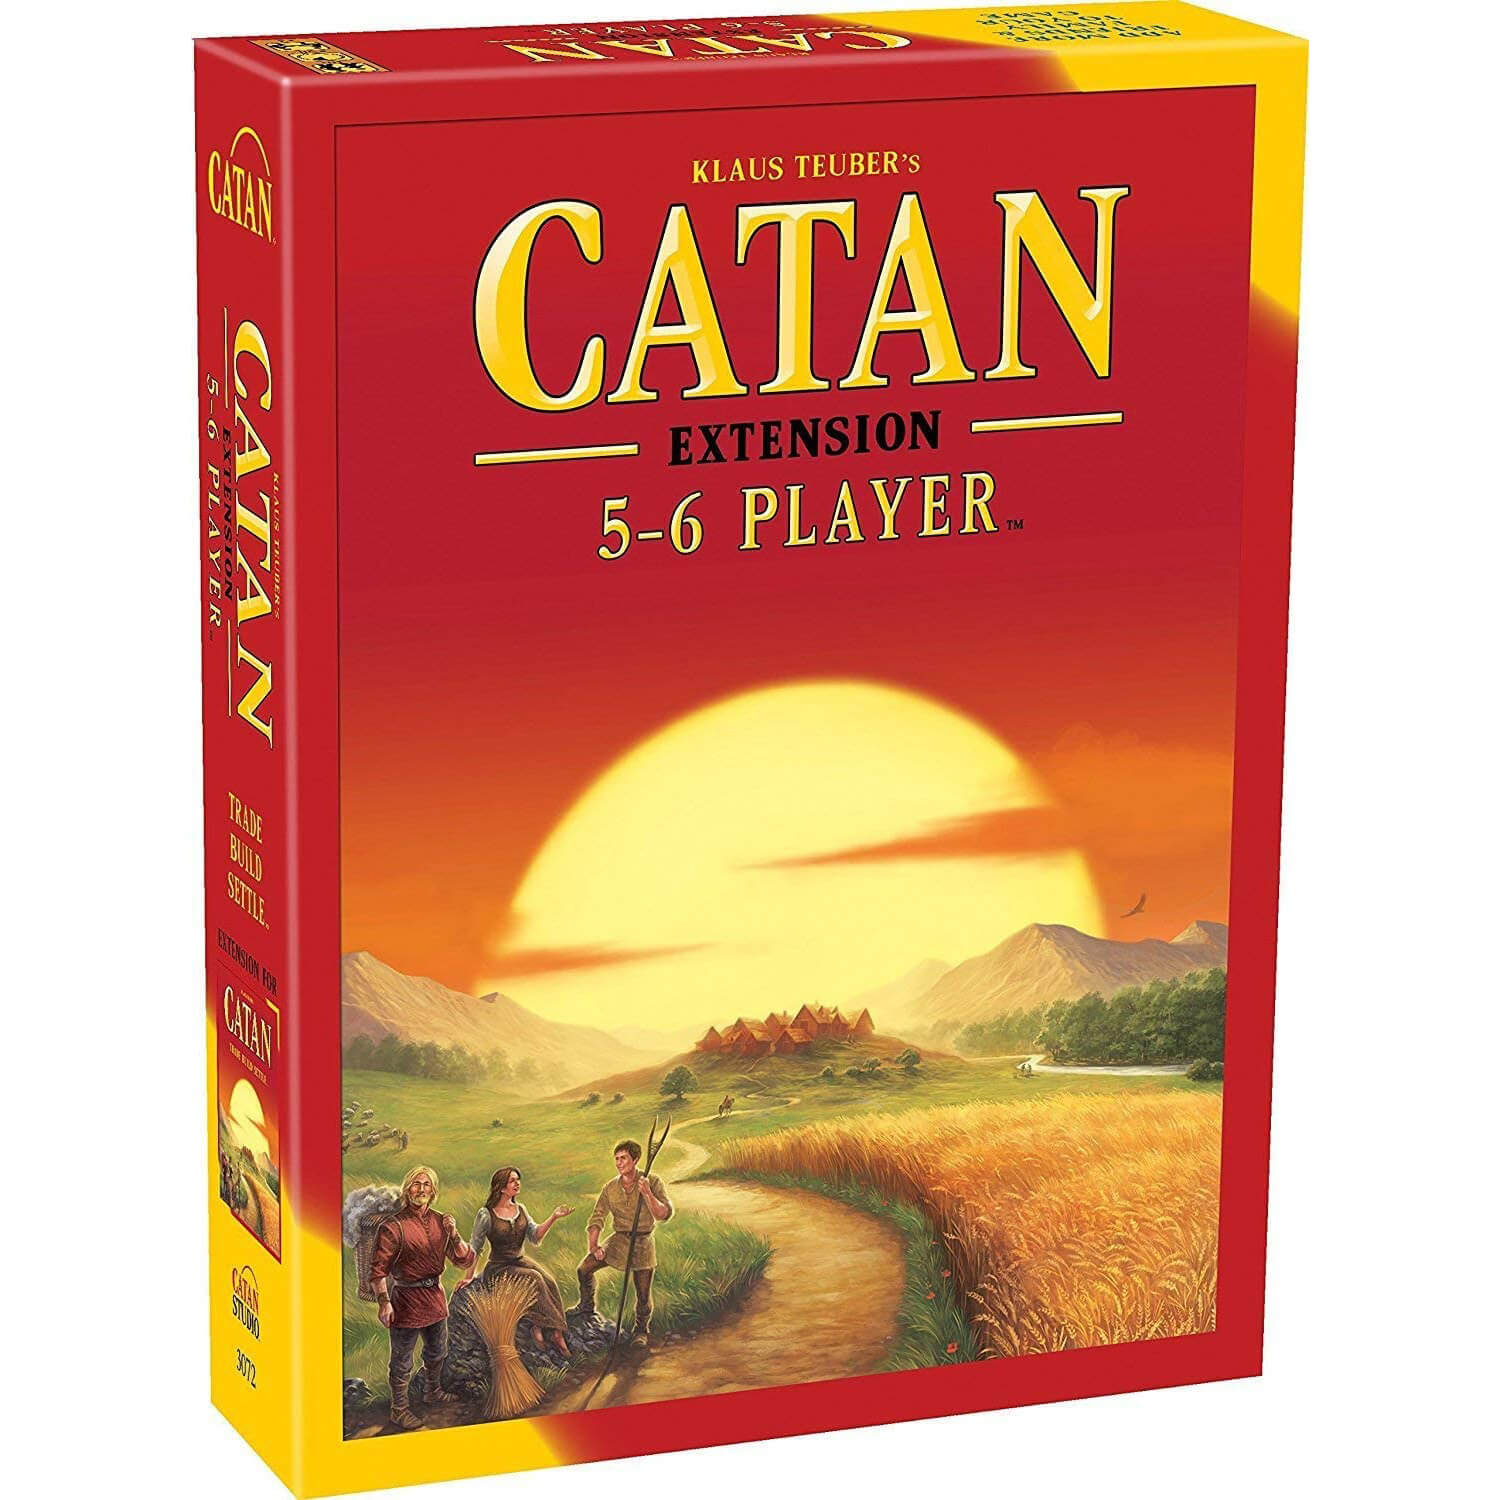 Catan Game Exention (5-6 Players)